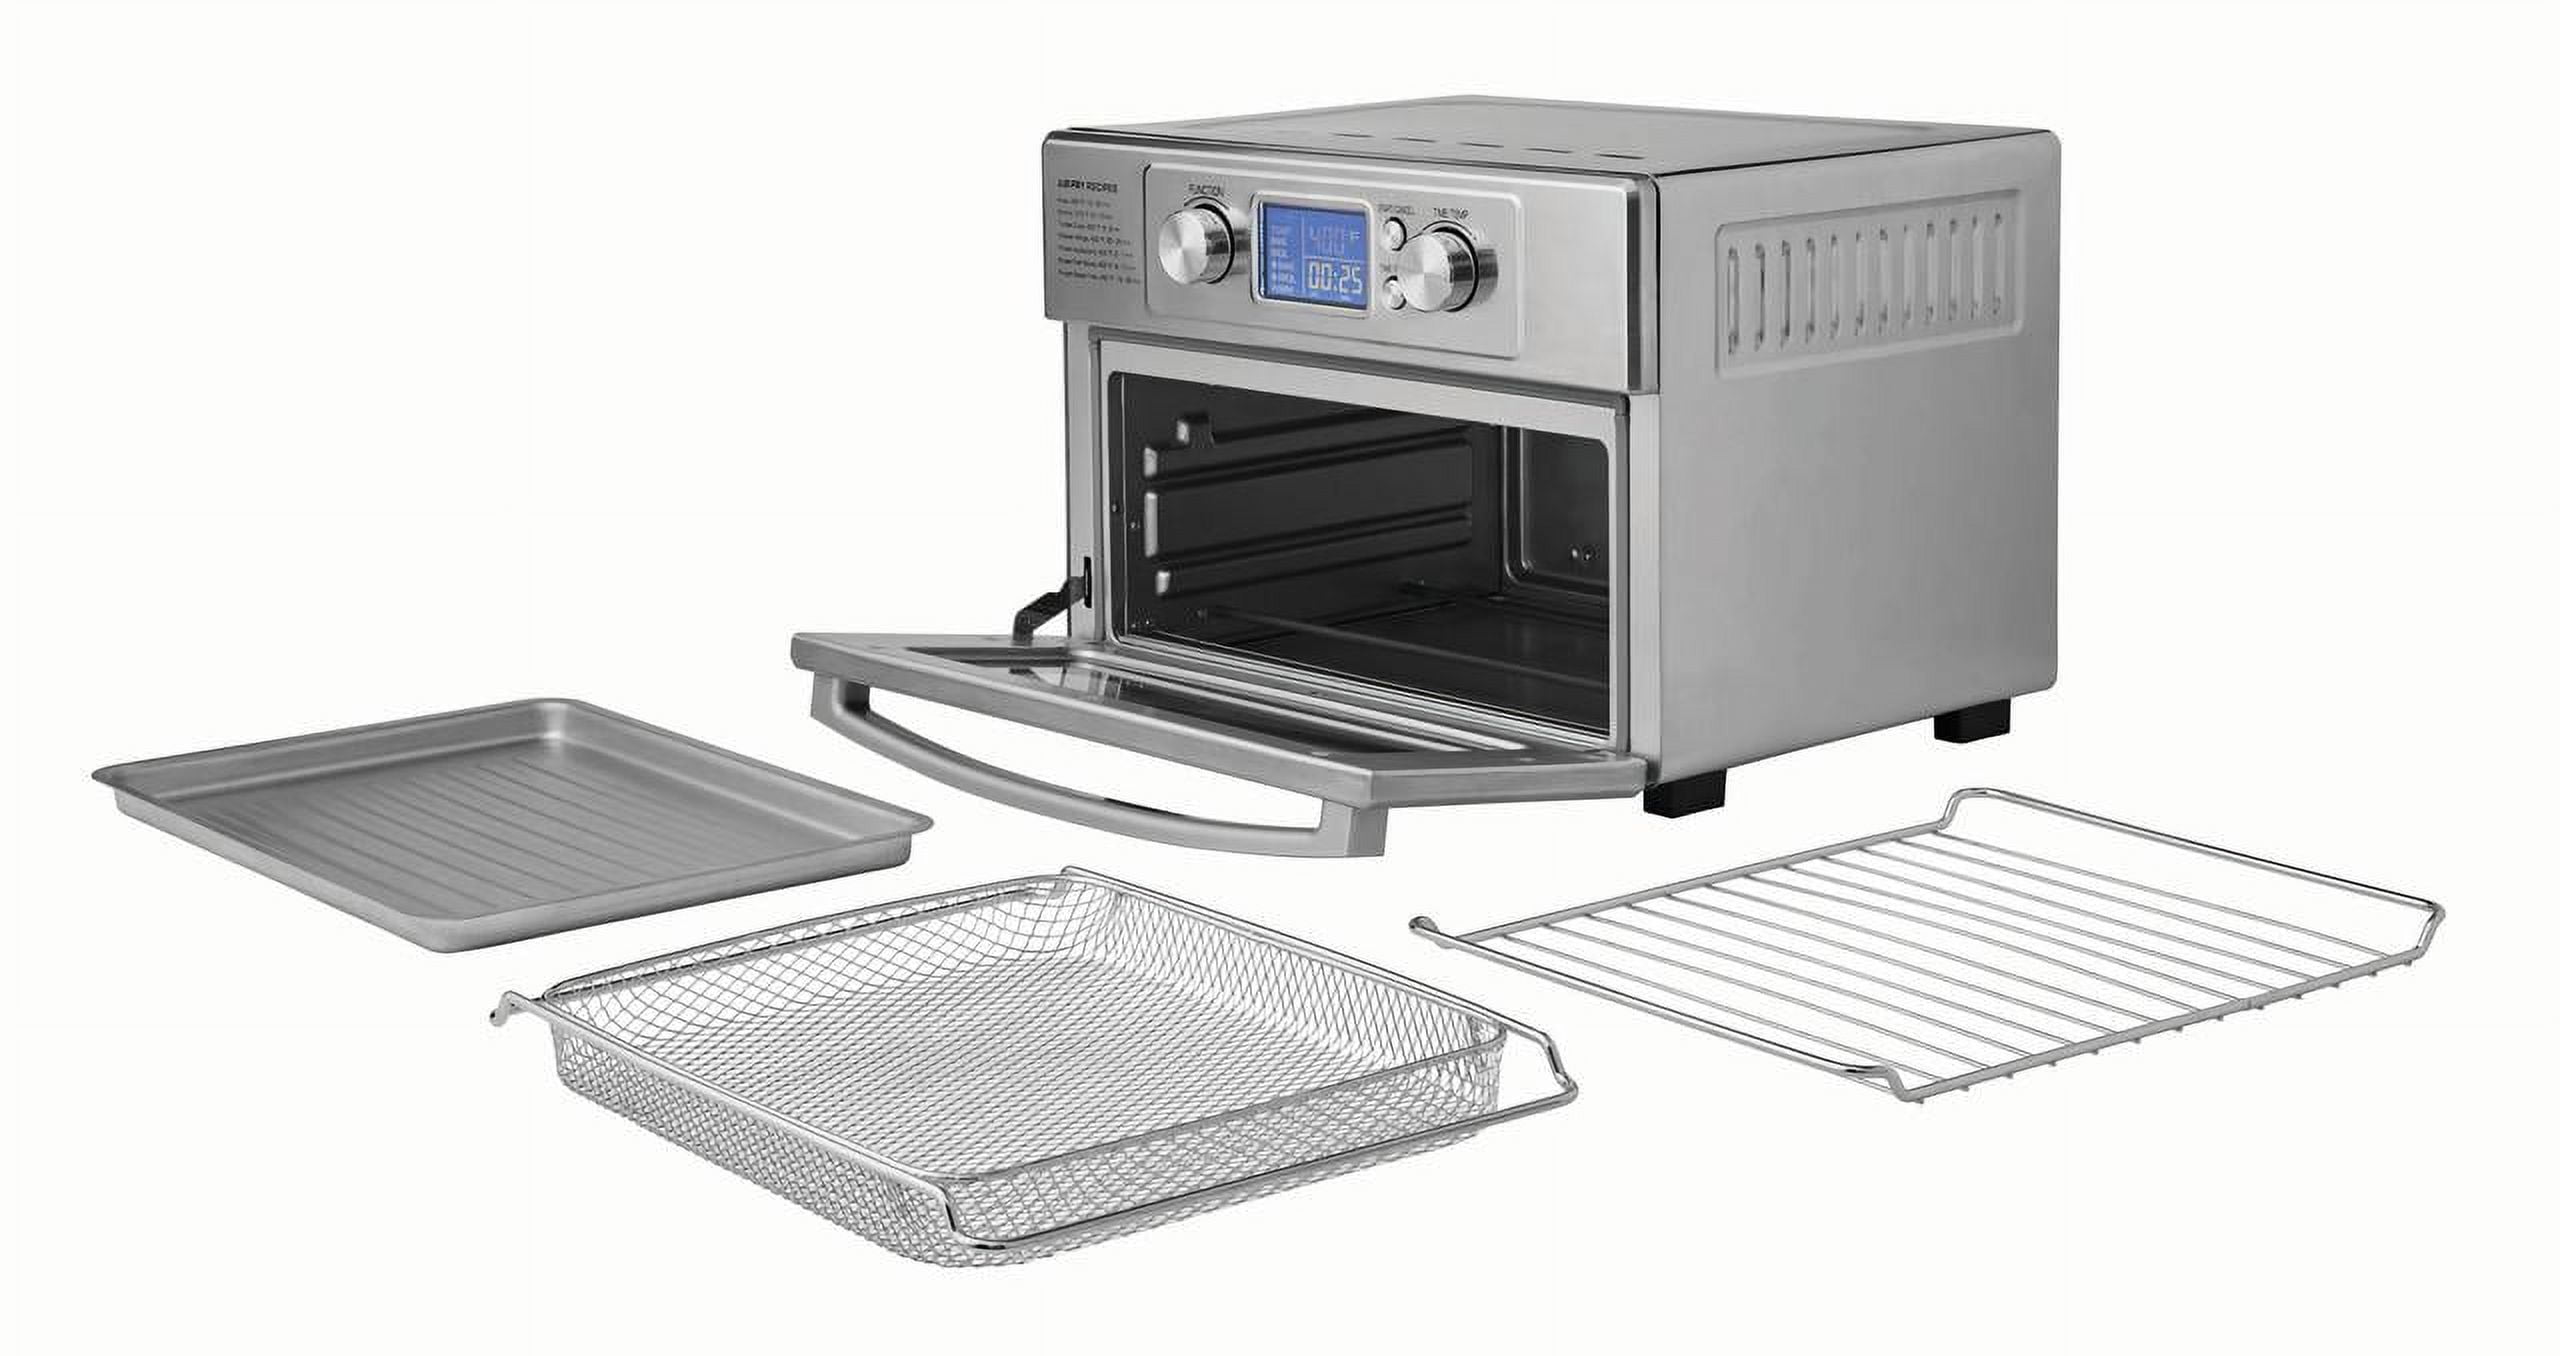 Farberware Stainless Steel MC25CEX Oven Toaster & Toaster Oven Review -  Consumer Reports